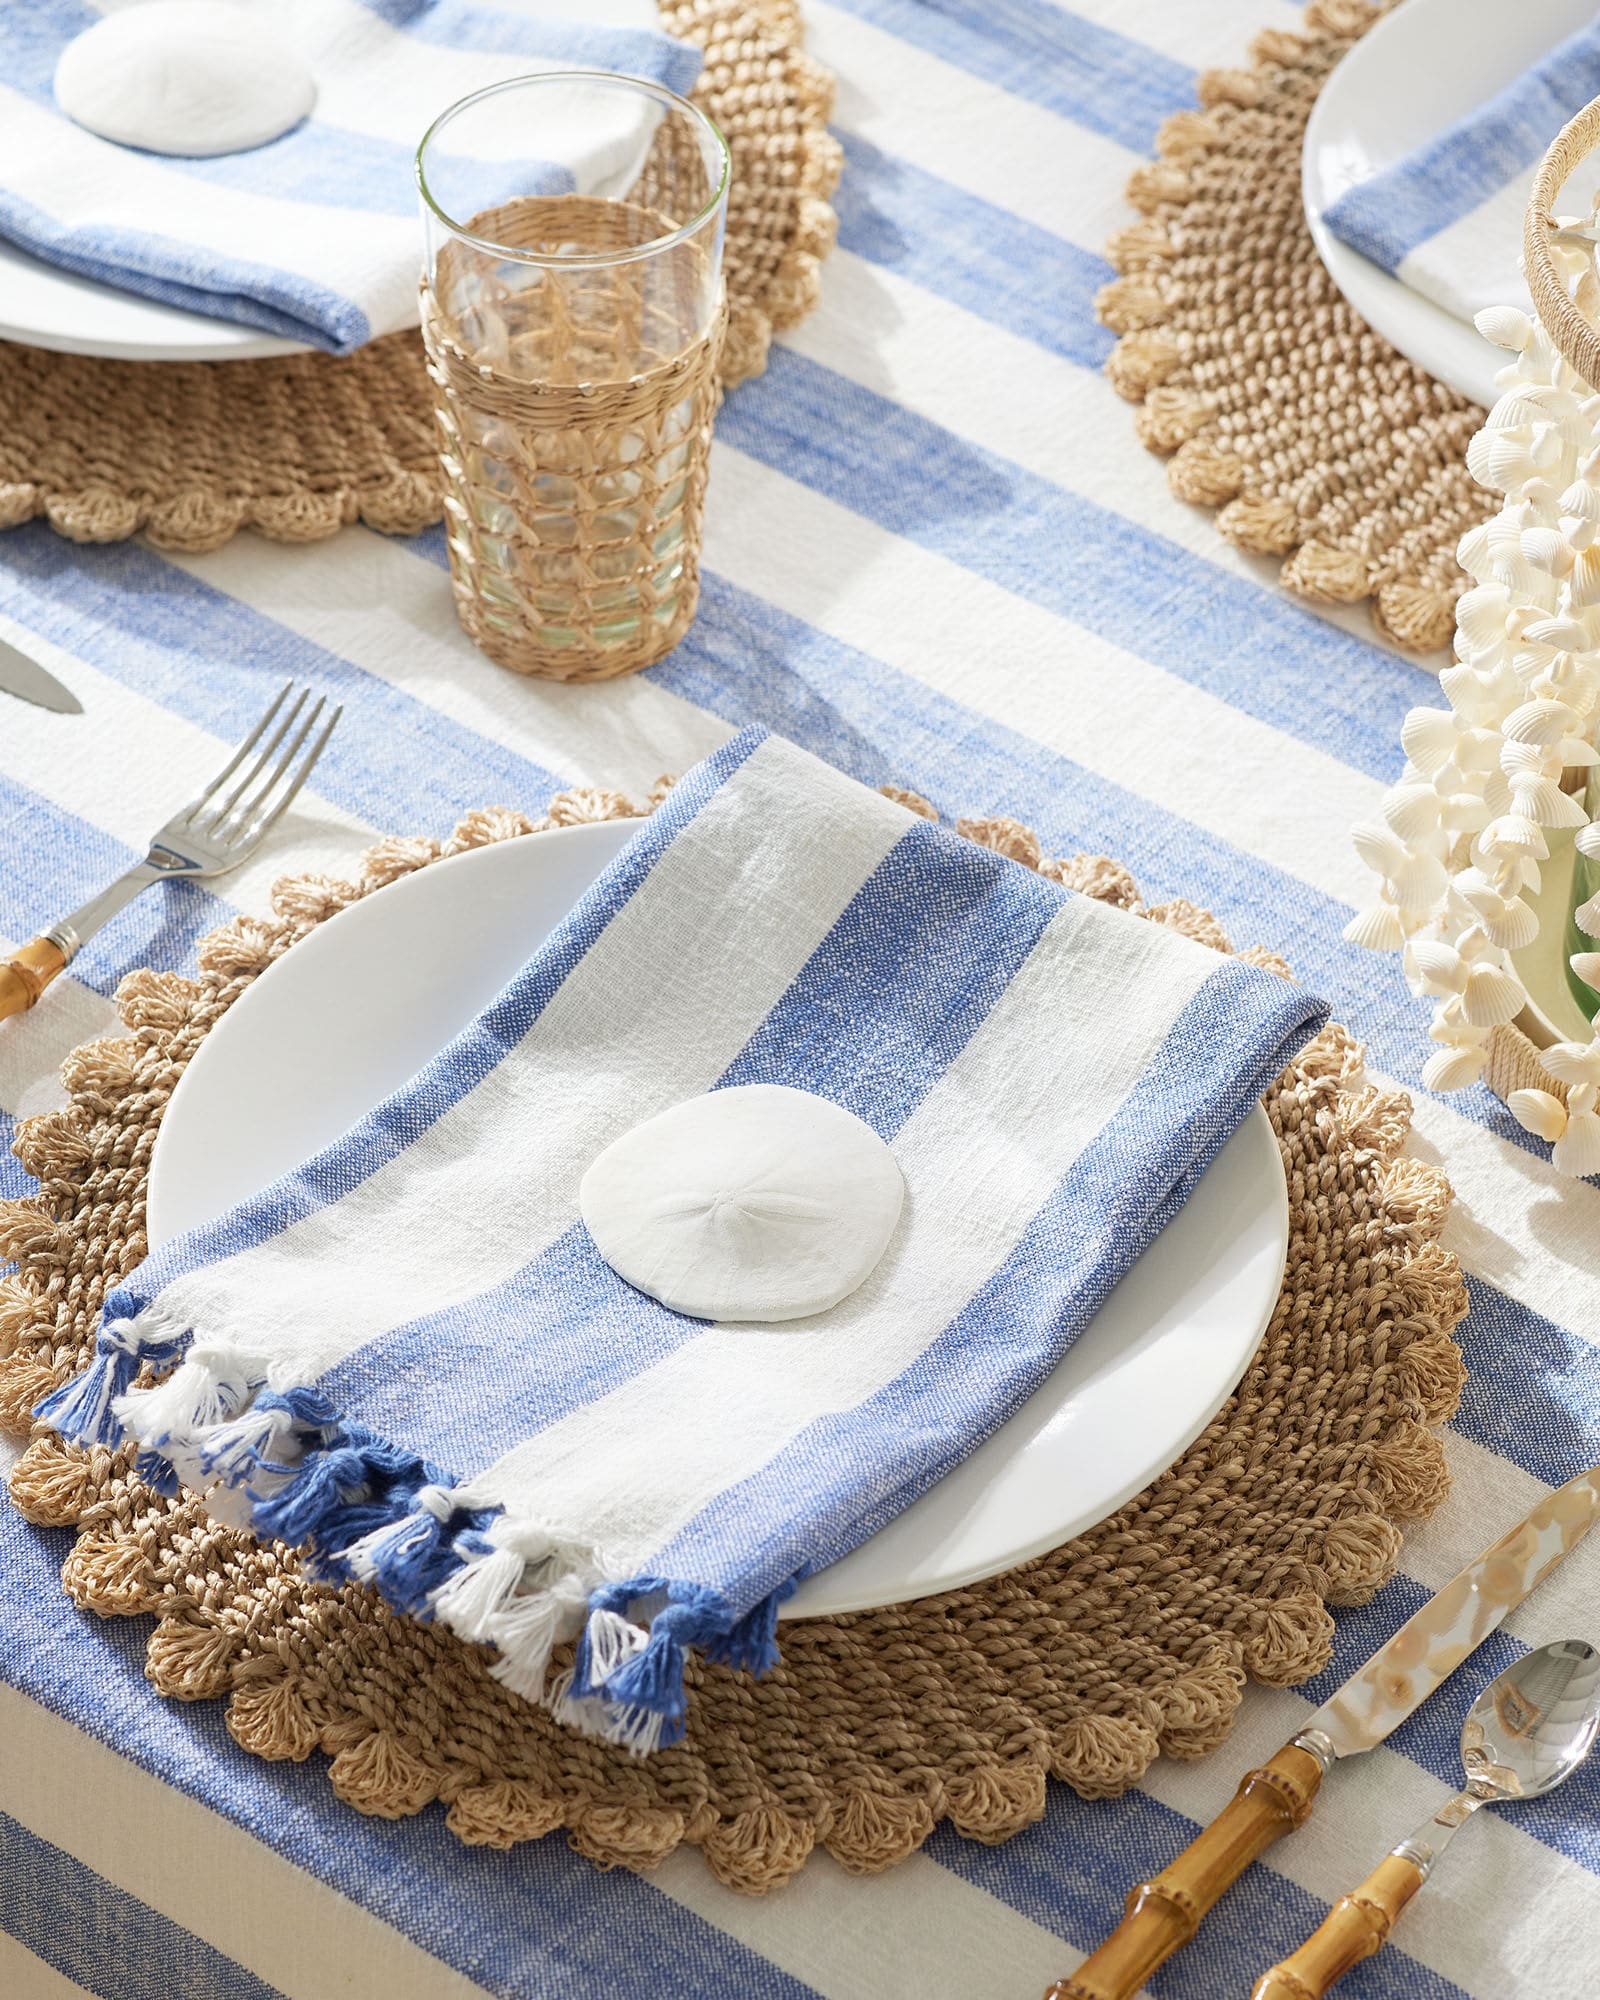 Tablesetting - blue and white stripe napkins - raffia placemats - Serena & lily